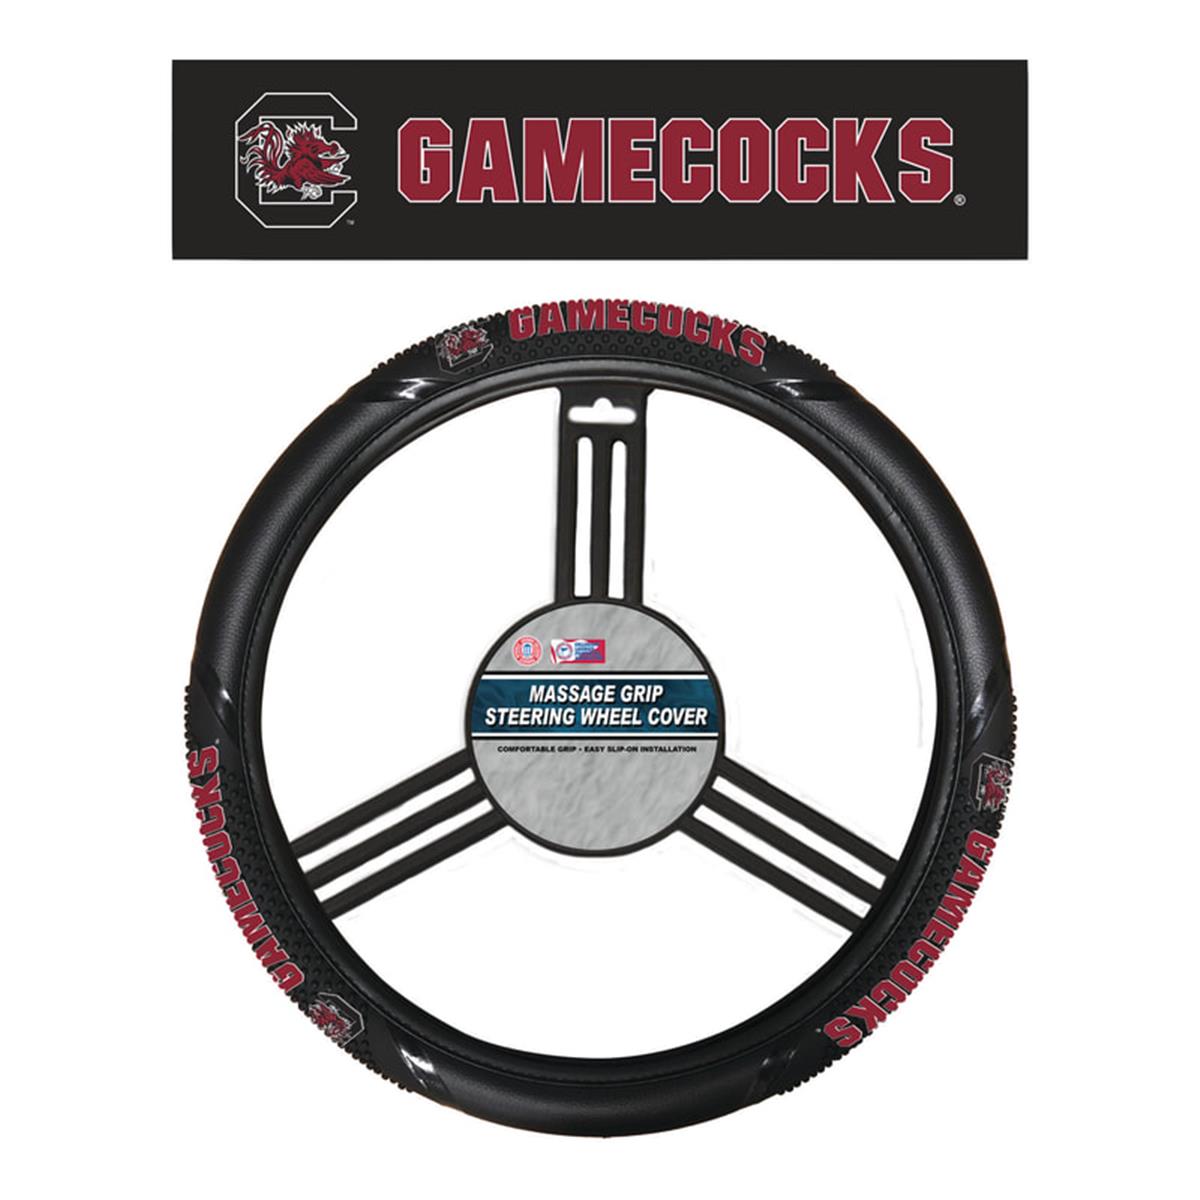 Picture of Fremont Die 2324556660 NCAA South Carolina Gamecocks Steering Wheel Cover - Massage Grip Style